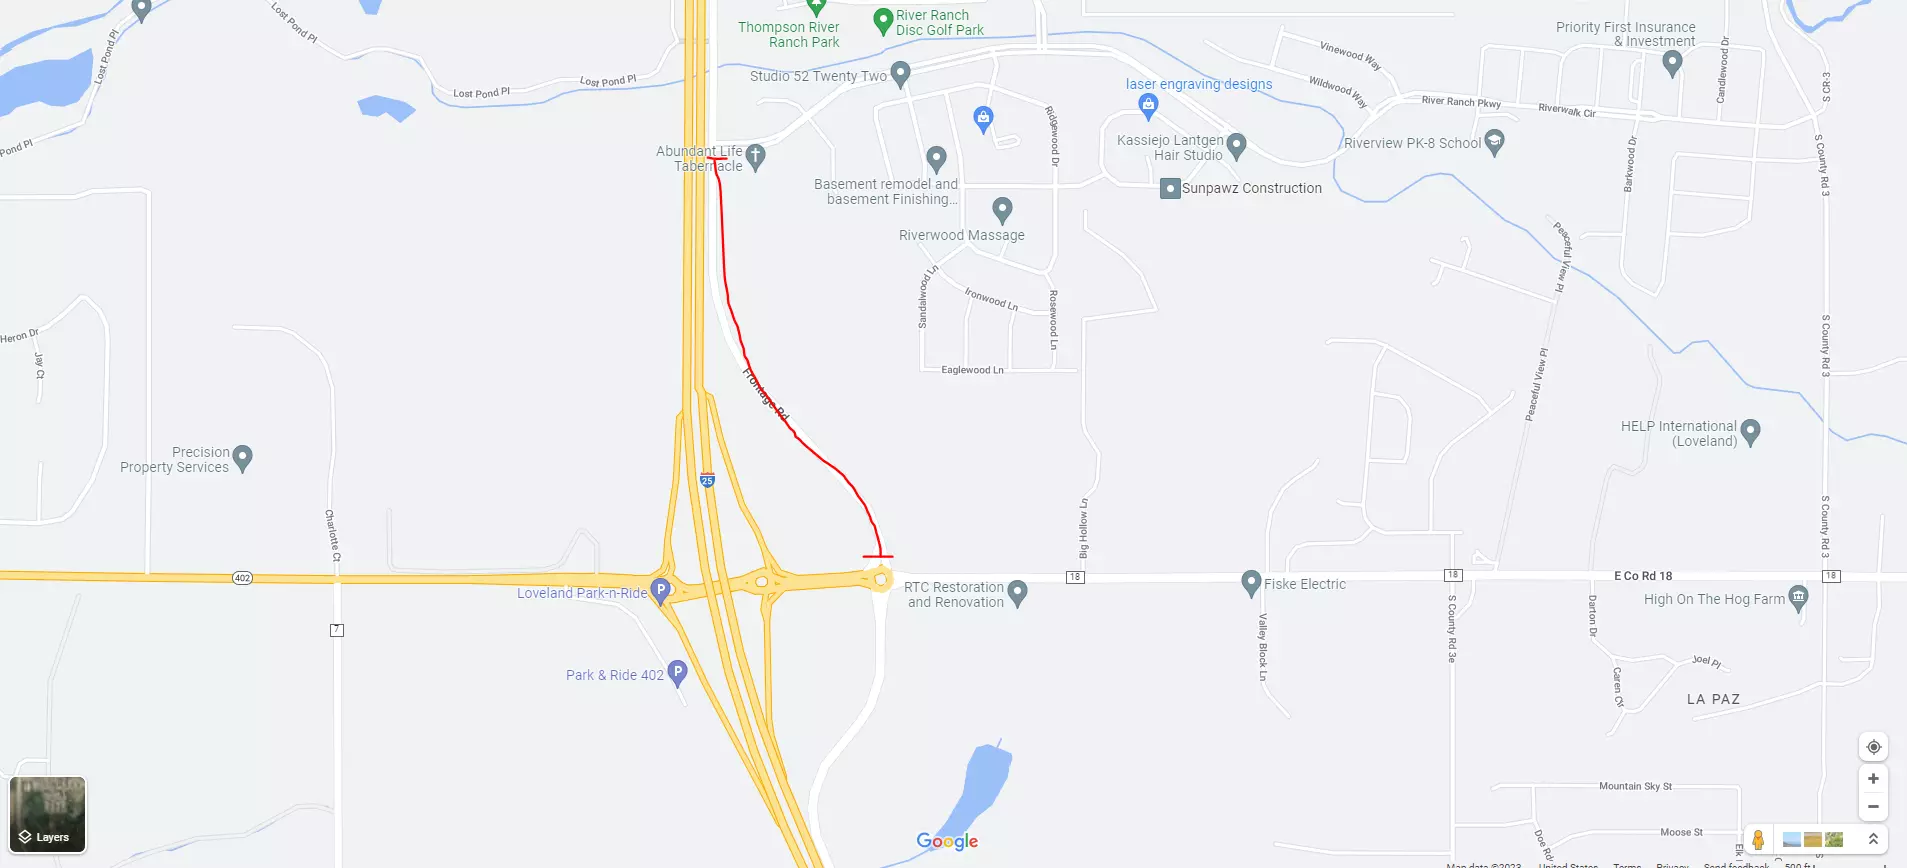 Map of Frontage Road Closure as described in the page text